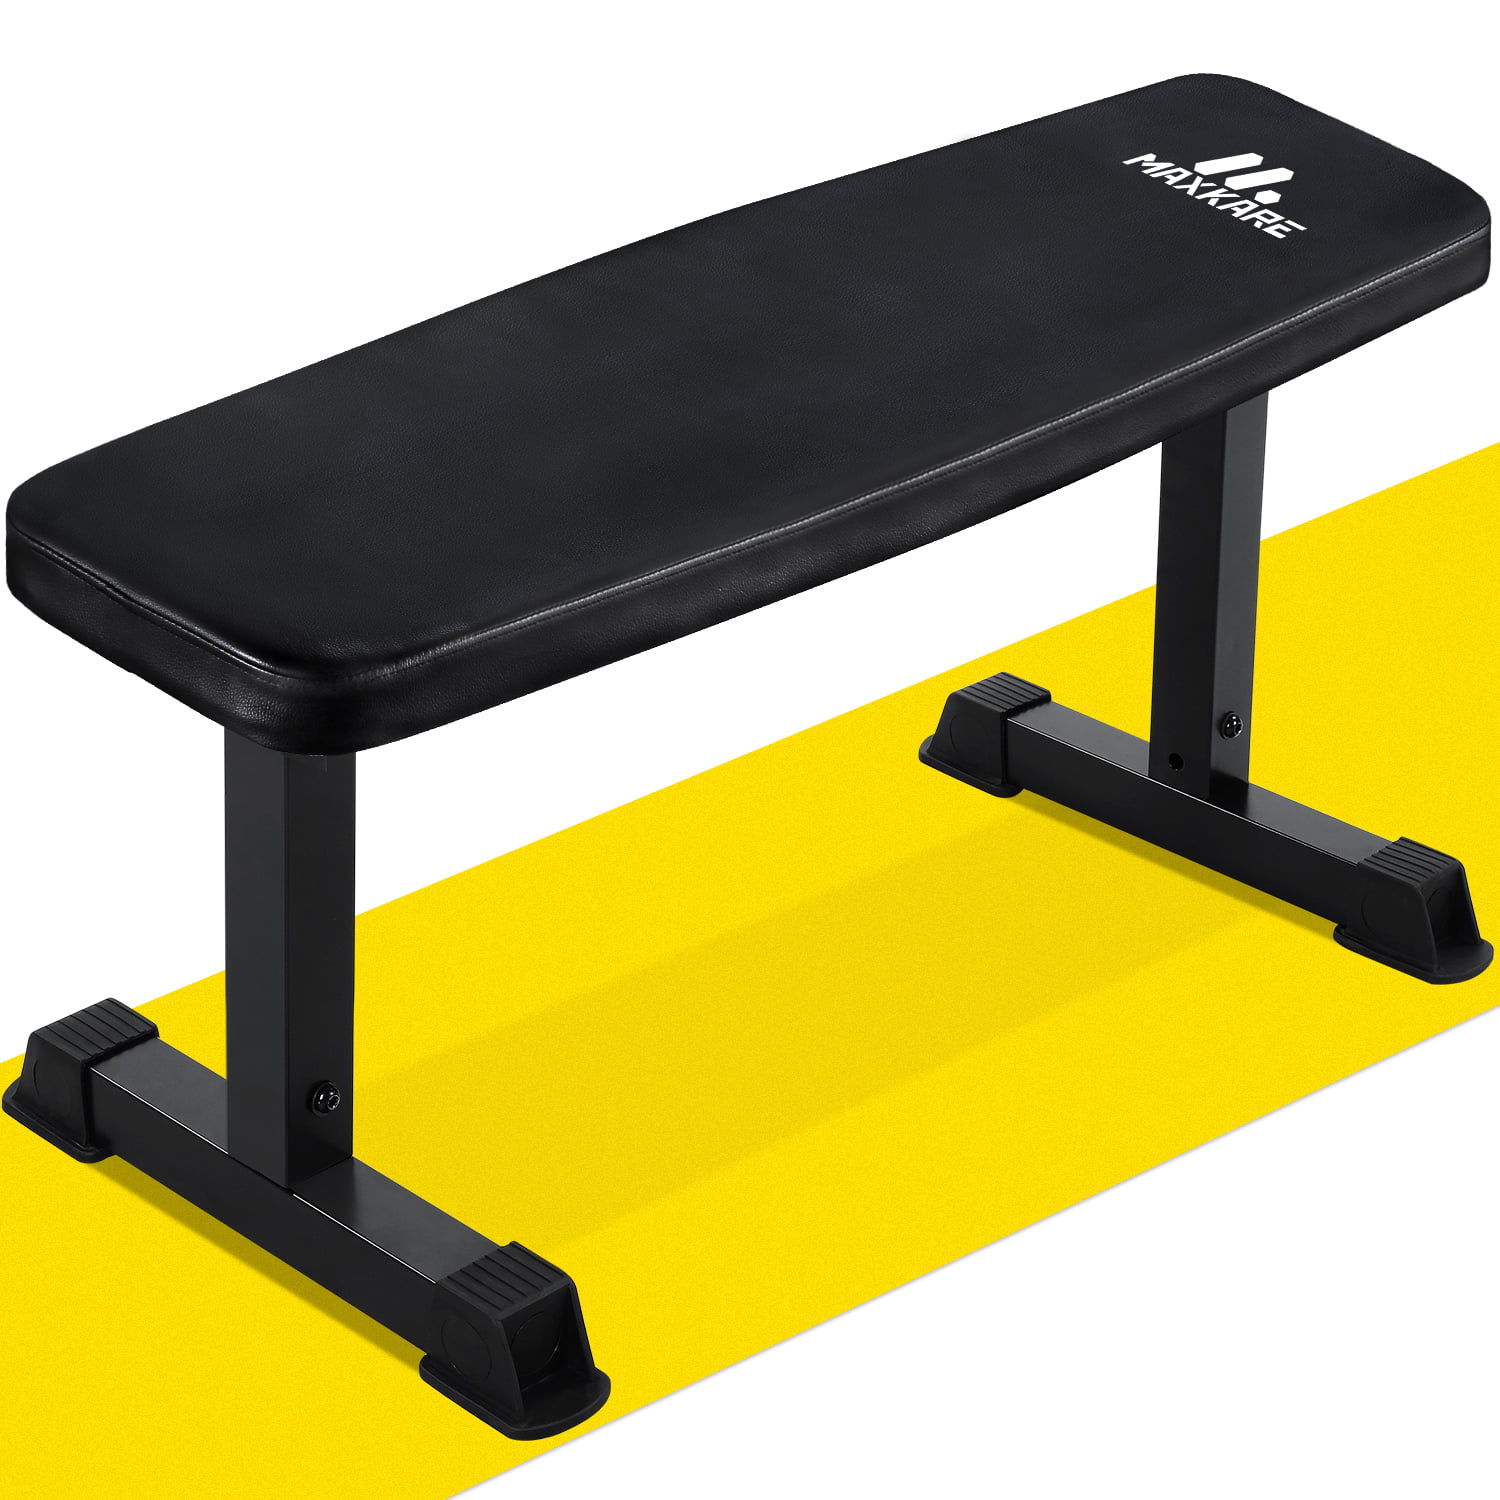 15 Minute Workout bench cover for Beginner